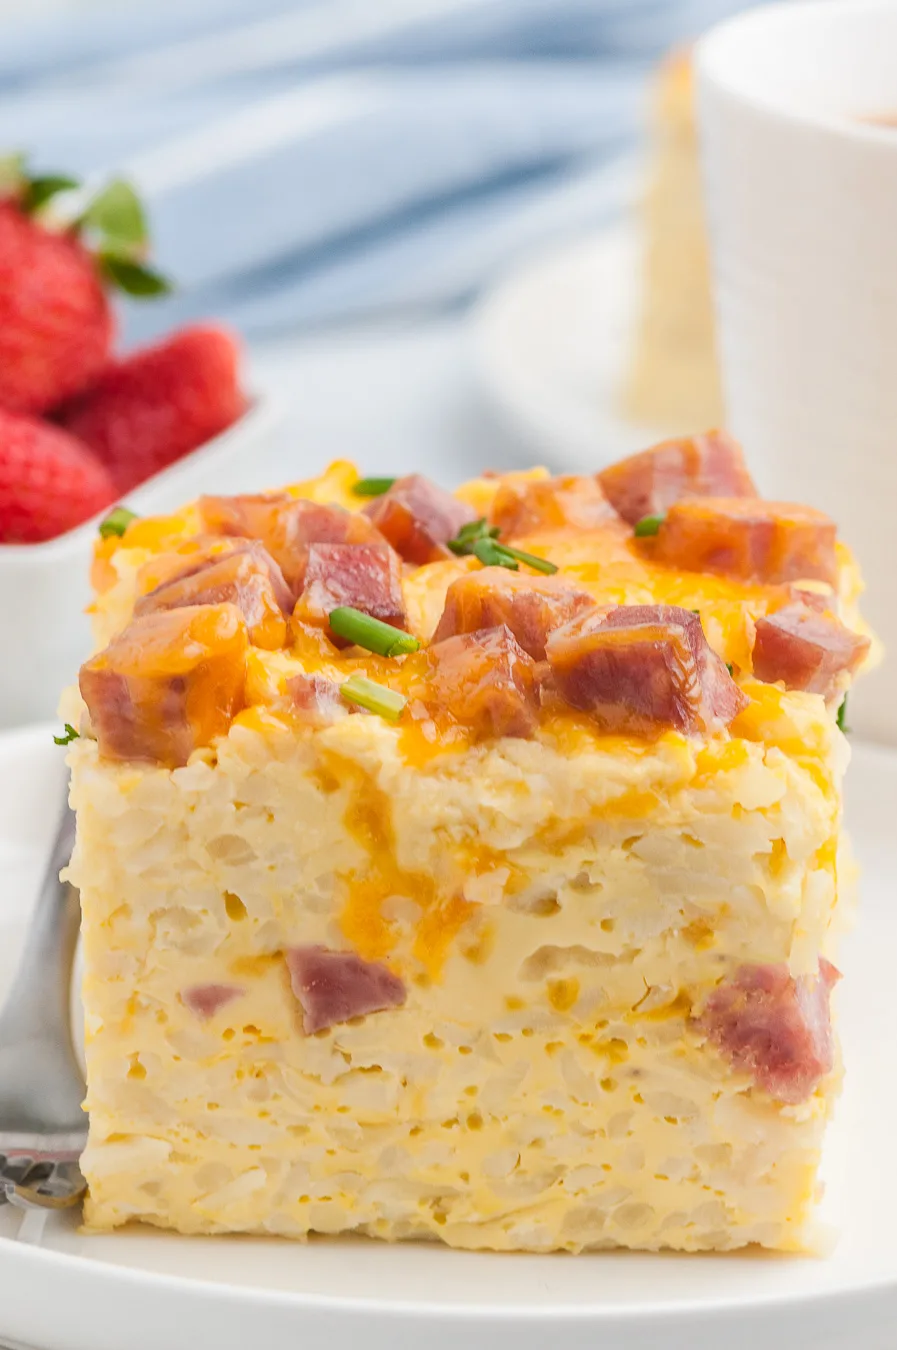 hearty slice of breakfast casserole sliced into a square portion. Strawberries and coffee mug in background.